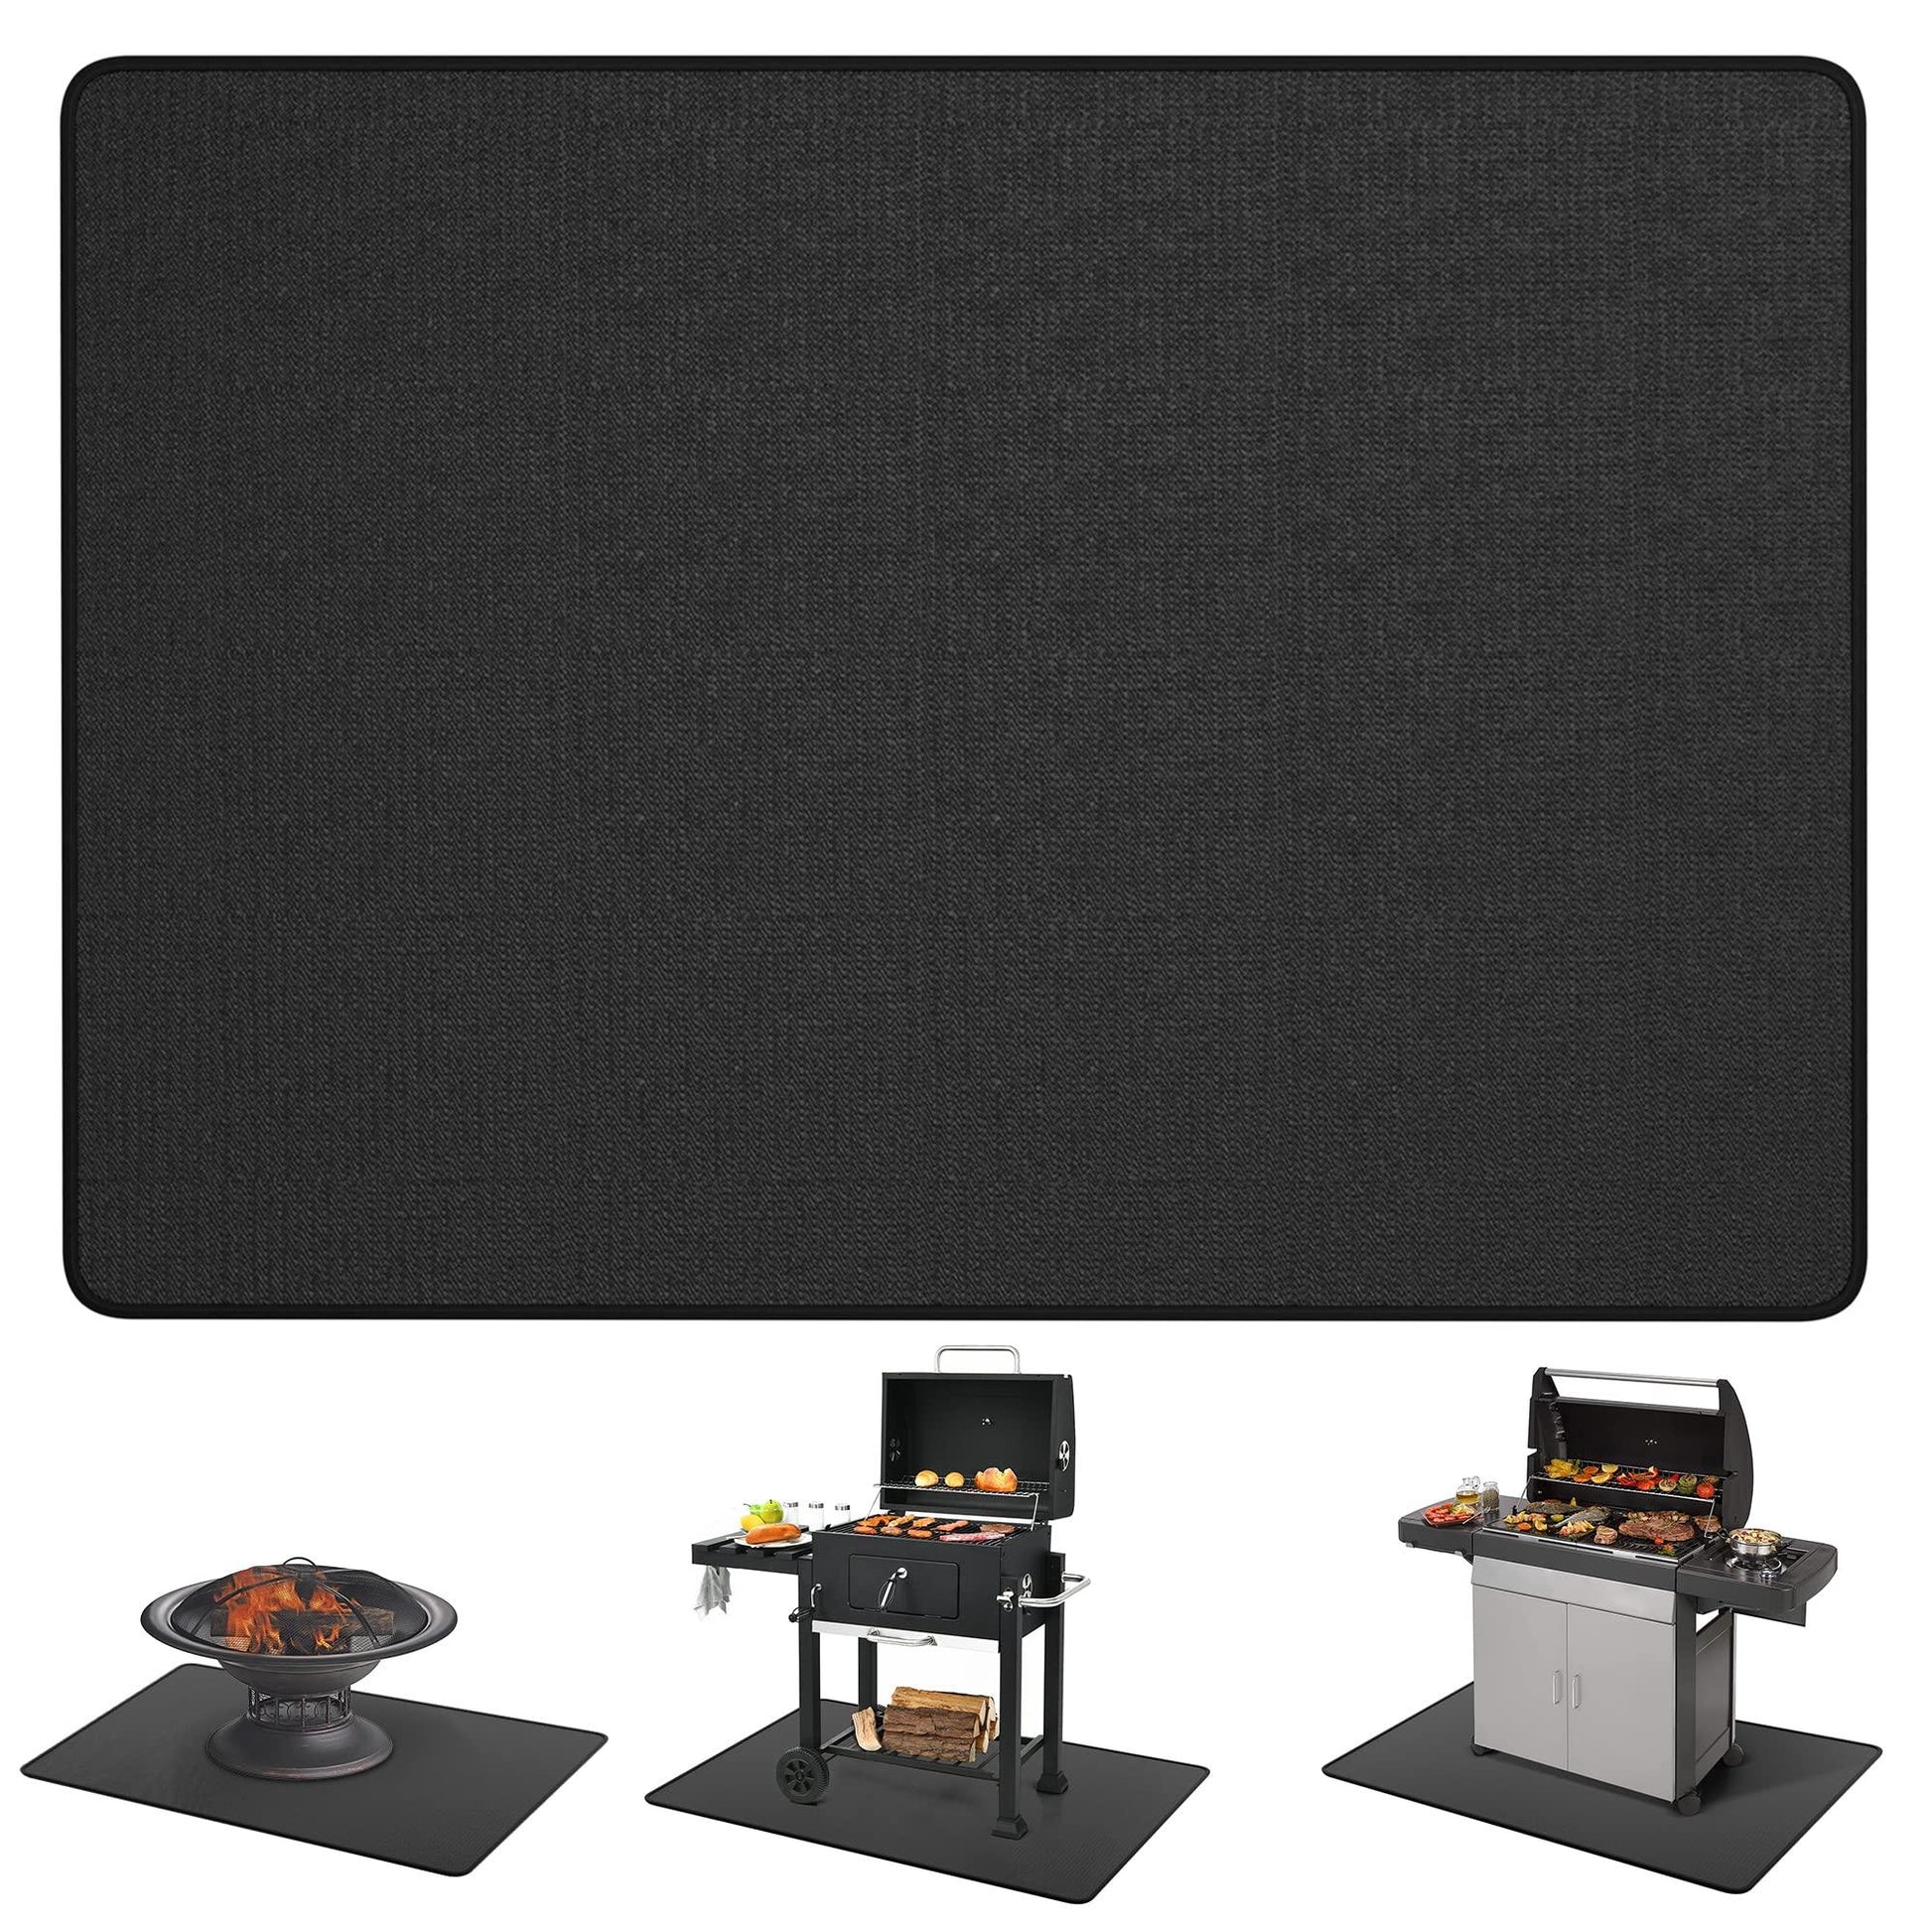 48 * 30 Under Grill Mats for Outdoor Grill Deck Protector, Double-Sided Fireproof Deck and Patio Protective Mat, BBQ Mat for Under BBQ, Oil-proof Mat for Gas Grills, Waterproof Grill Floor Pads - CookCave